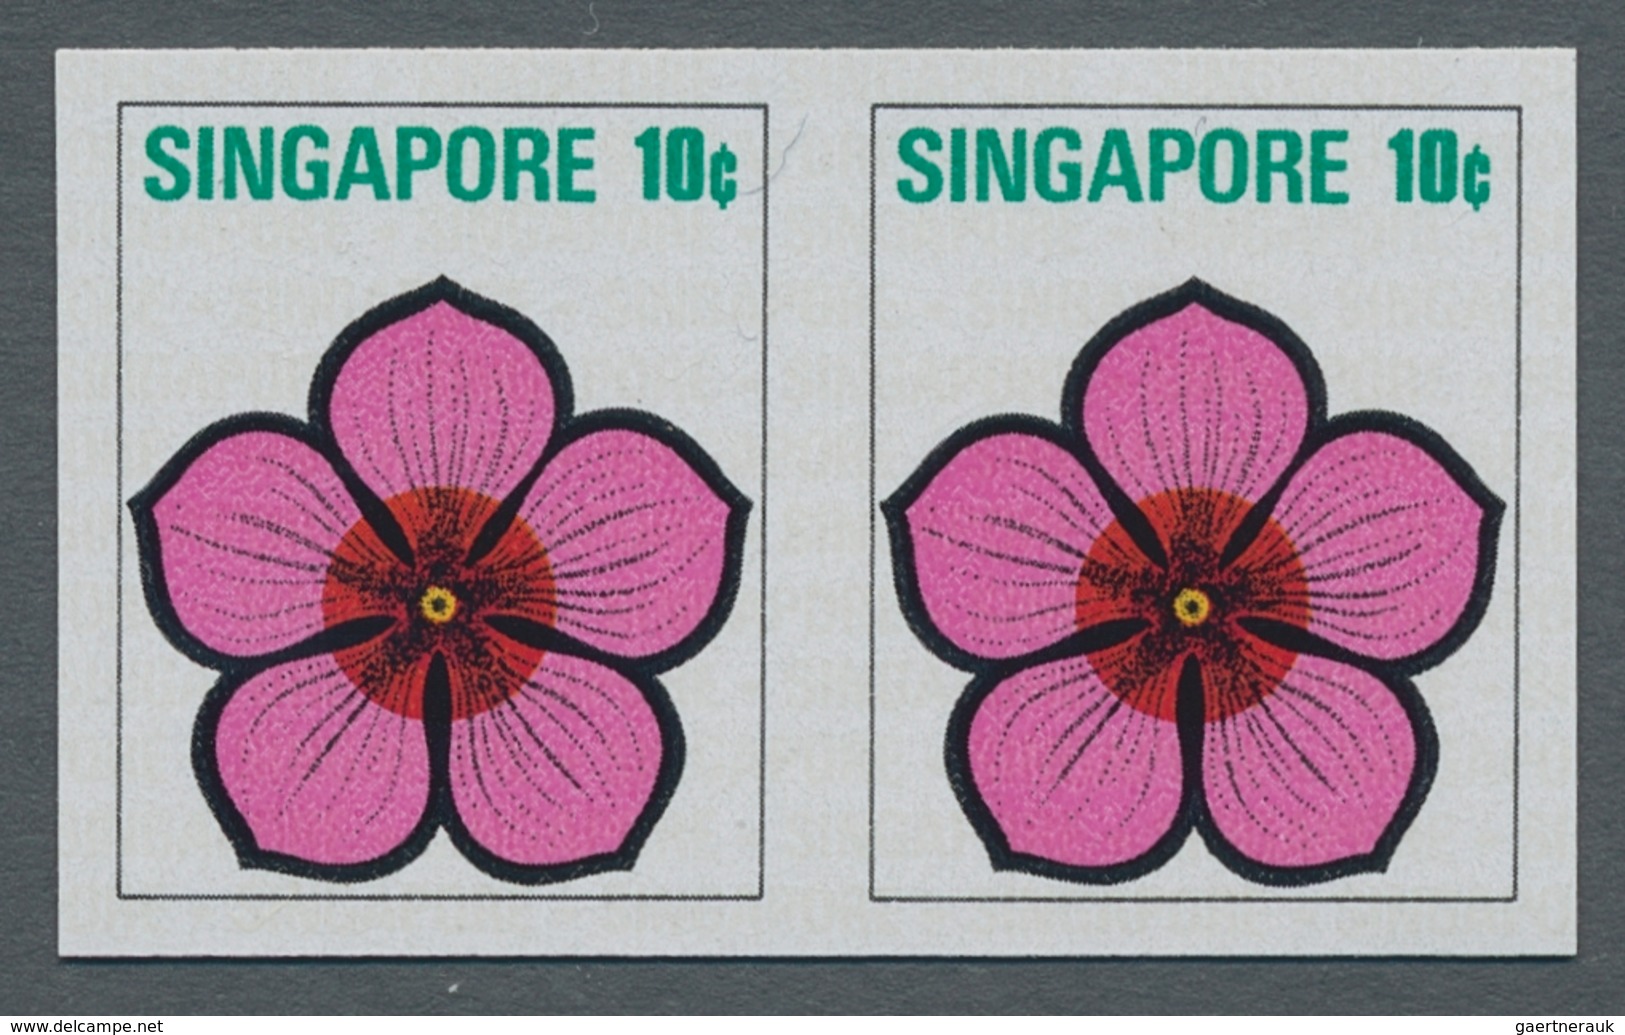 Singapur: 1973, flowers and fruits defintives complete set of 13 in a lot with about 50 IMPERFORATE